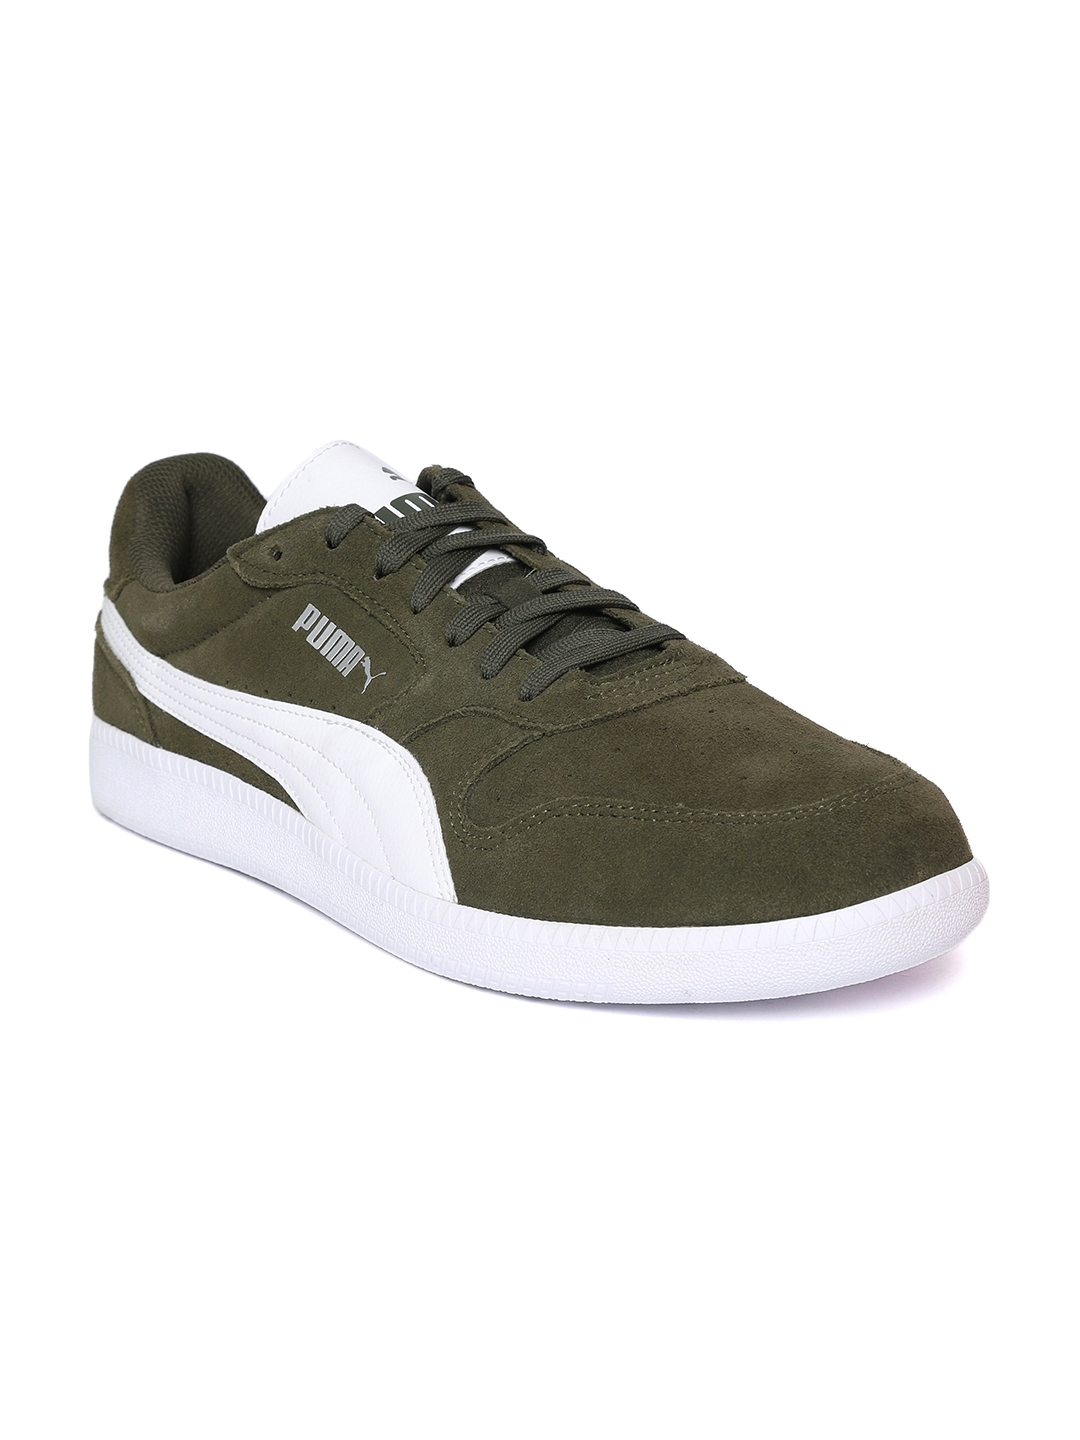 Buy Puma Unisex Olive Green Icra Trainer Suede Sneakers - Casual Shoes ...